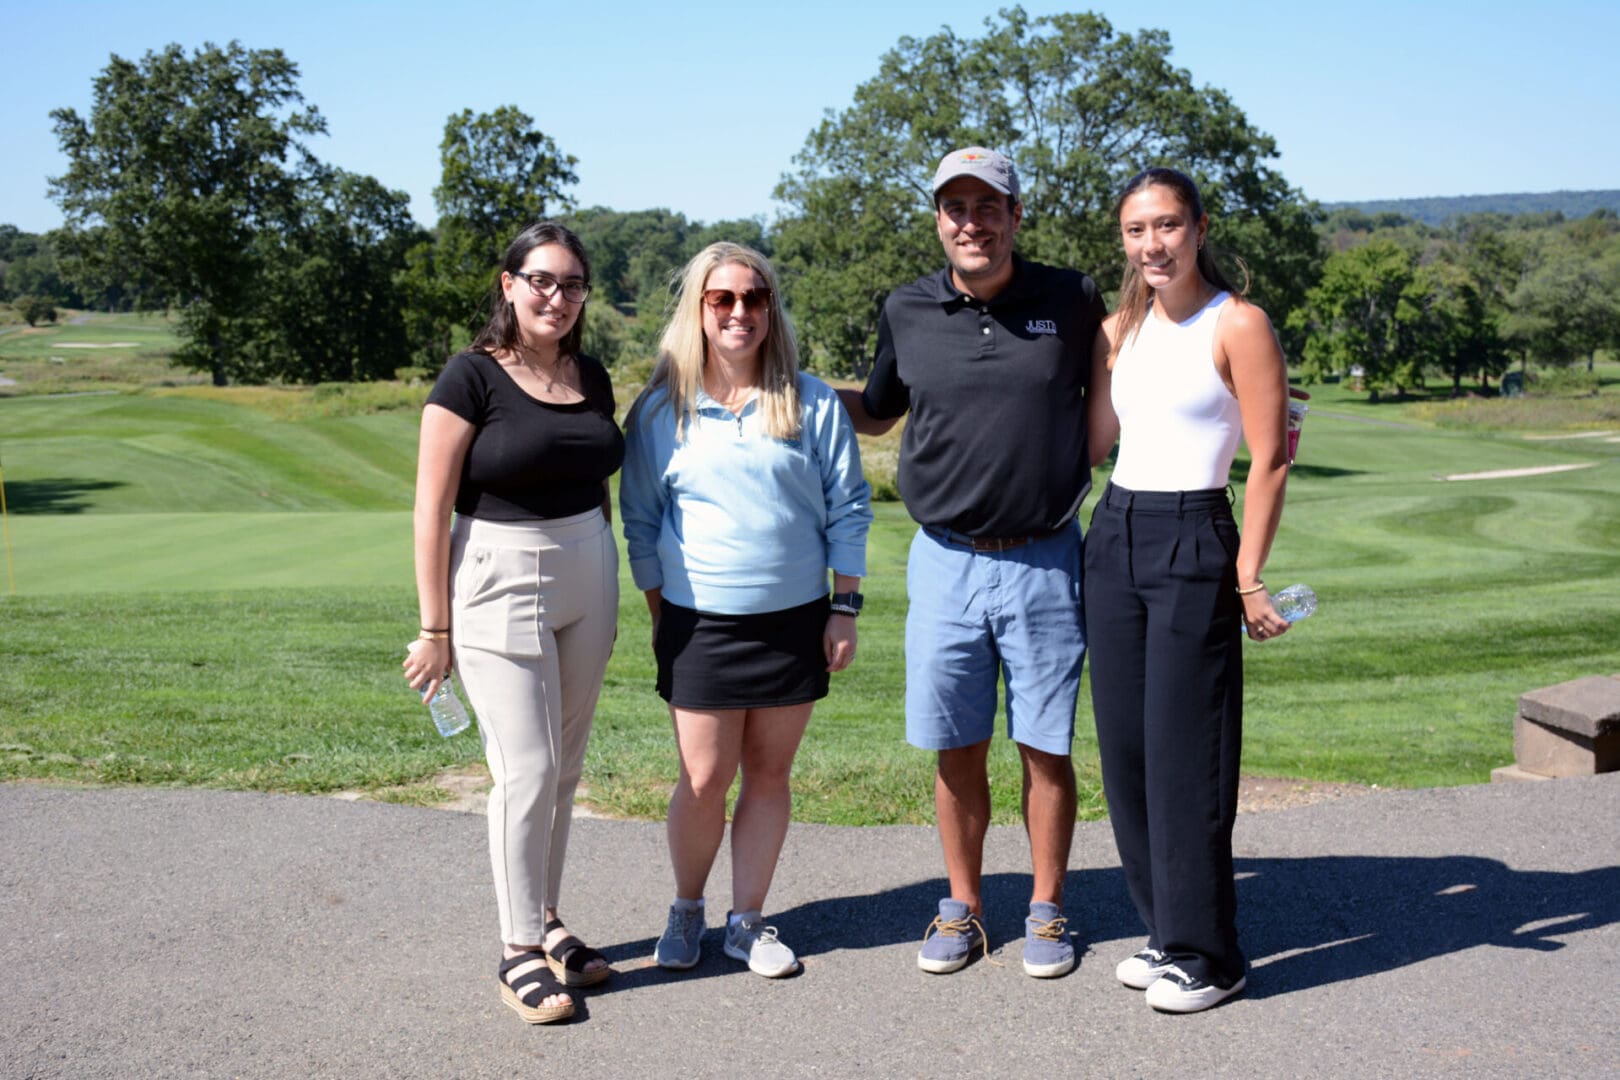 Four people posing for a photo on a golf course.